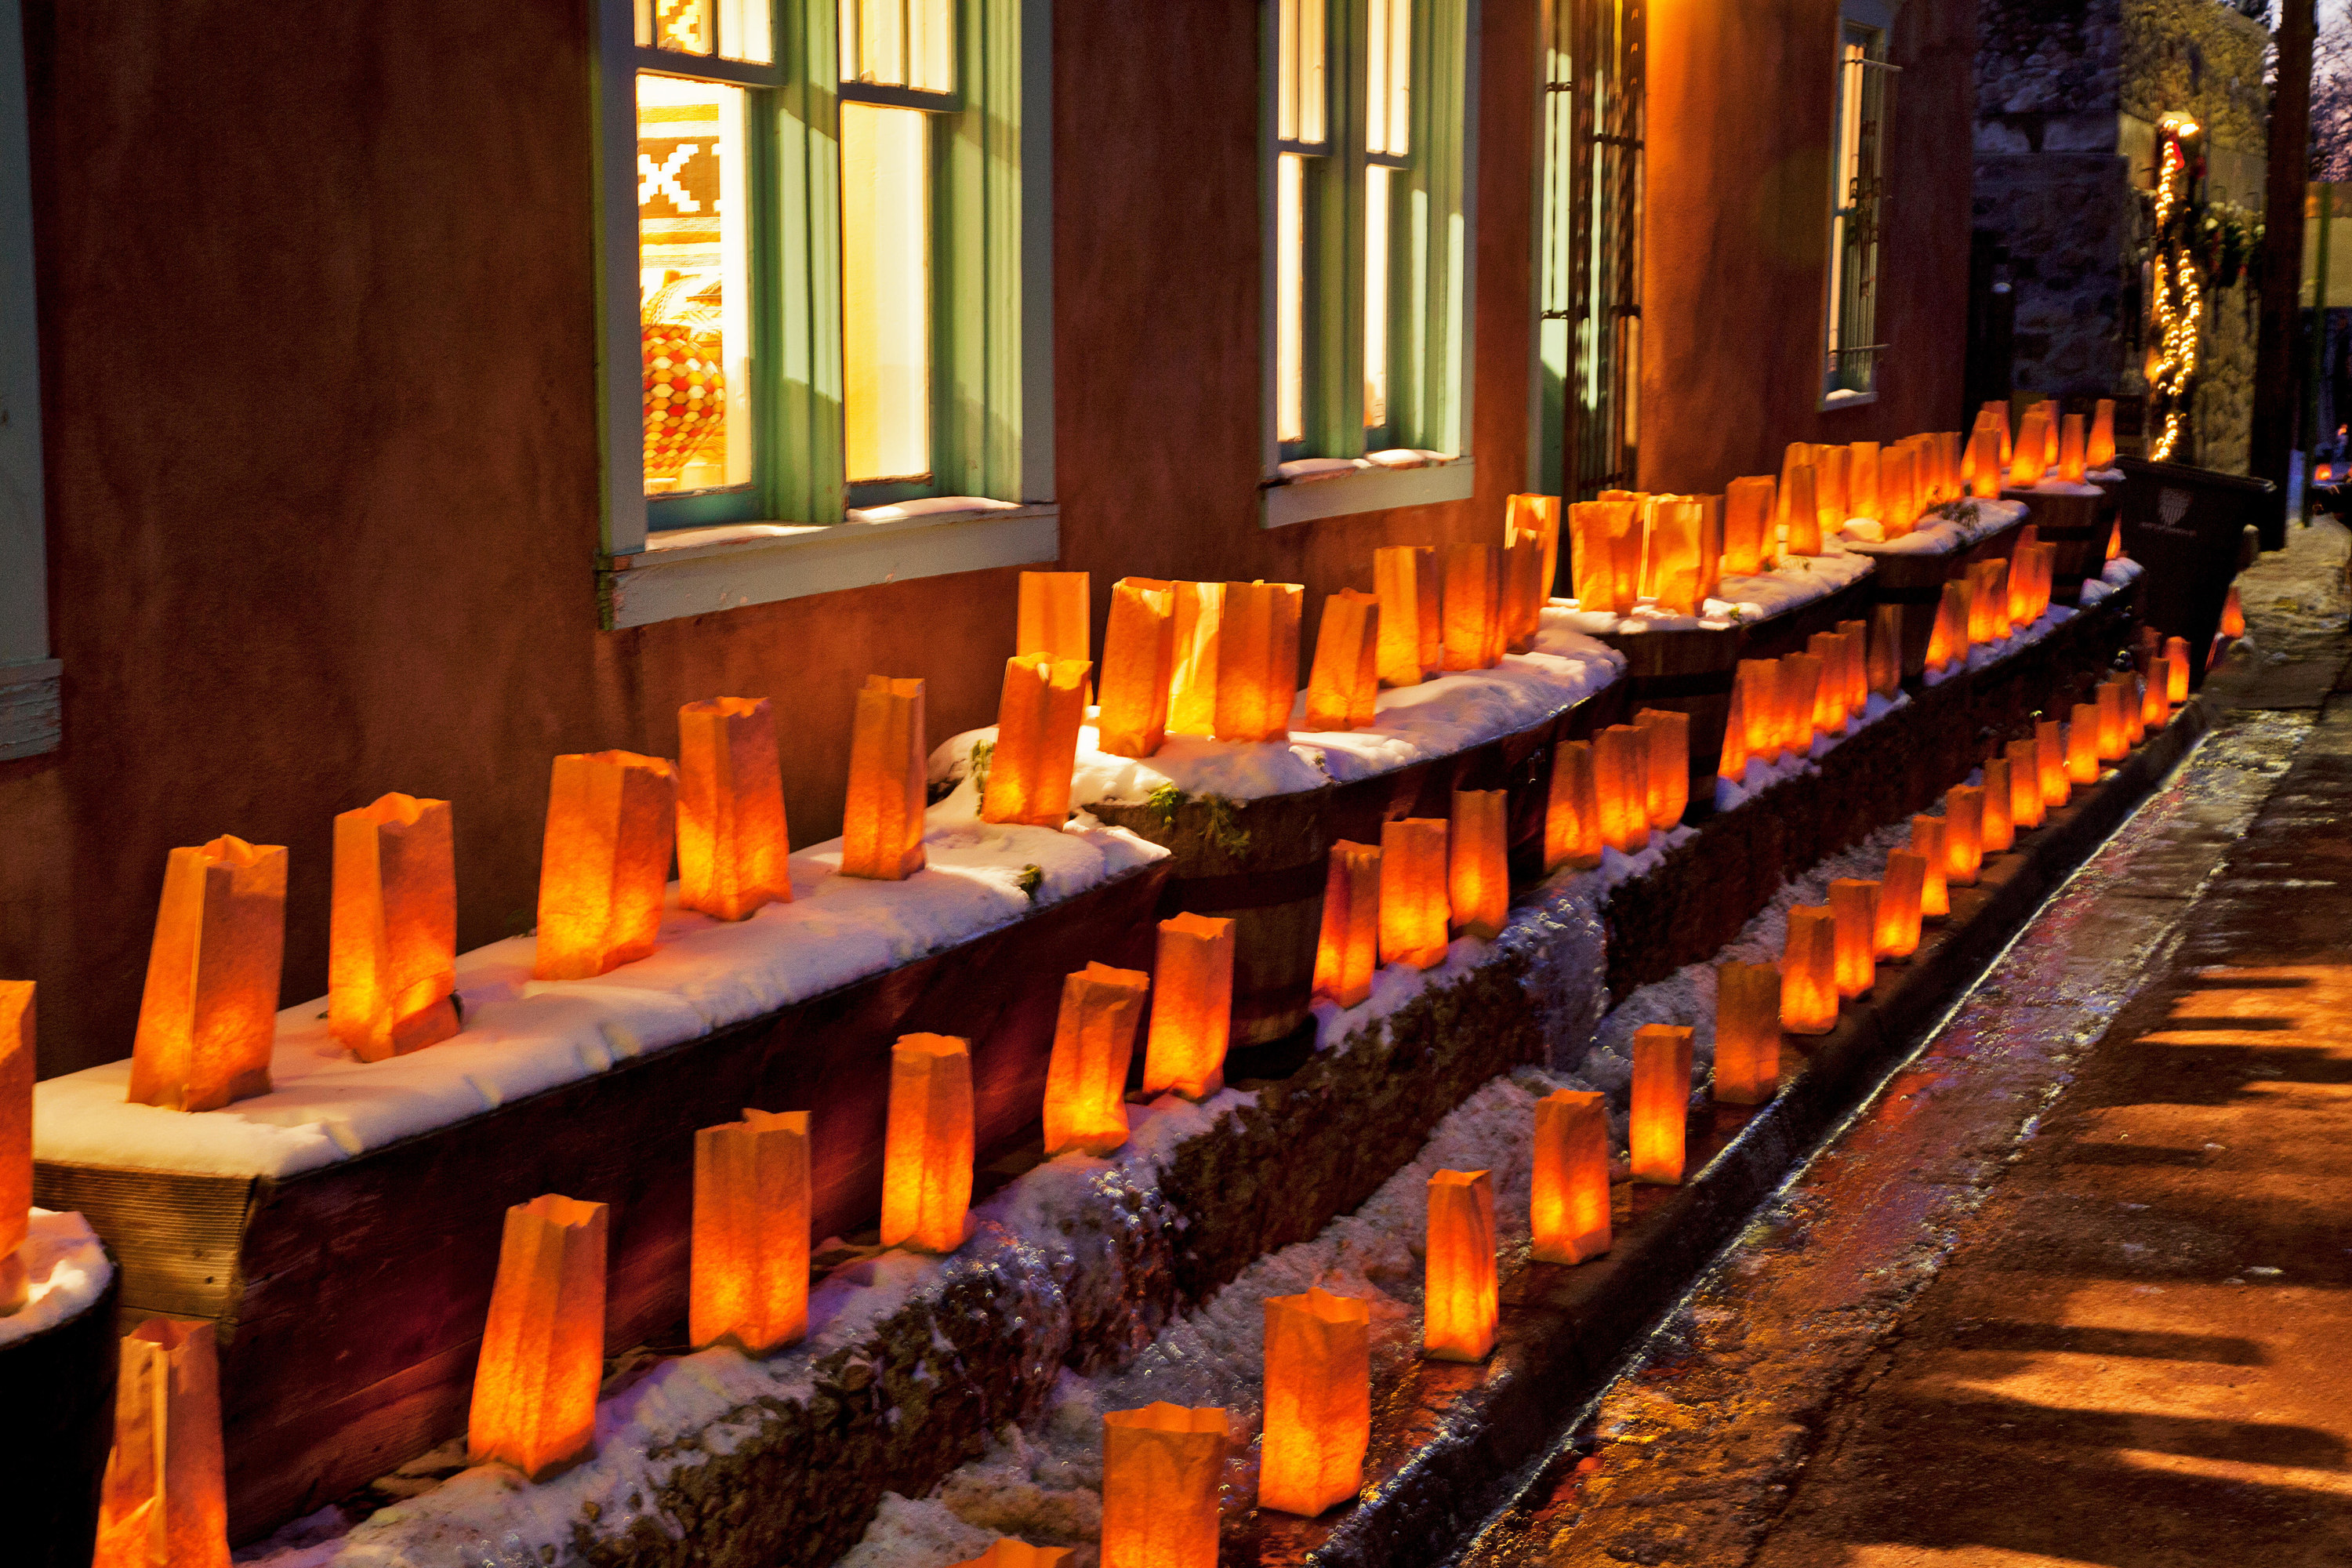 Luminarias lining the streets in Santa Fe during Christmastime